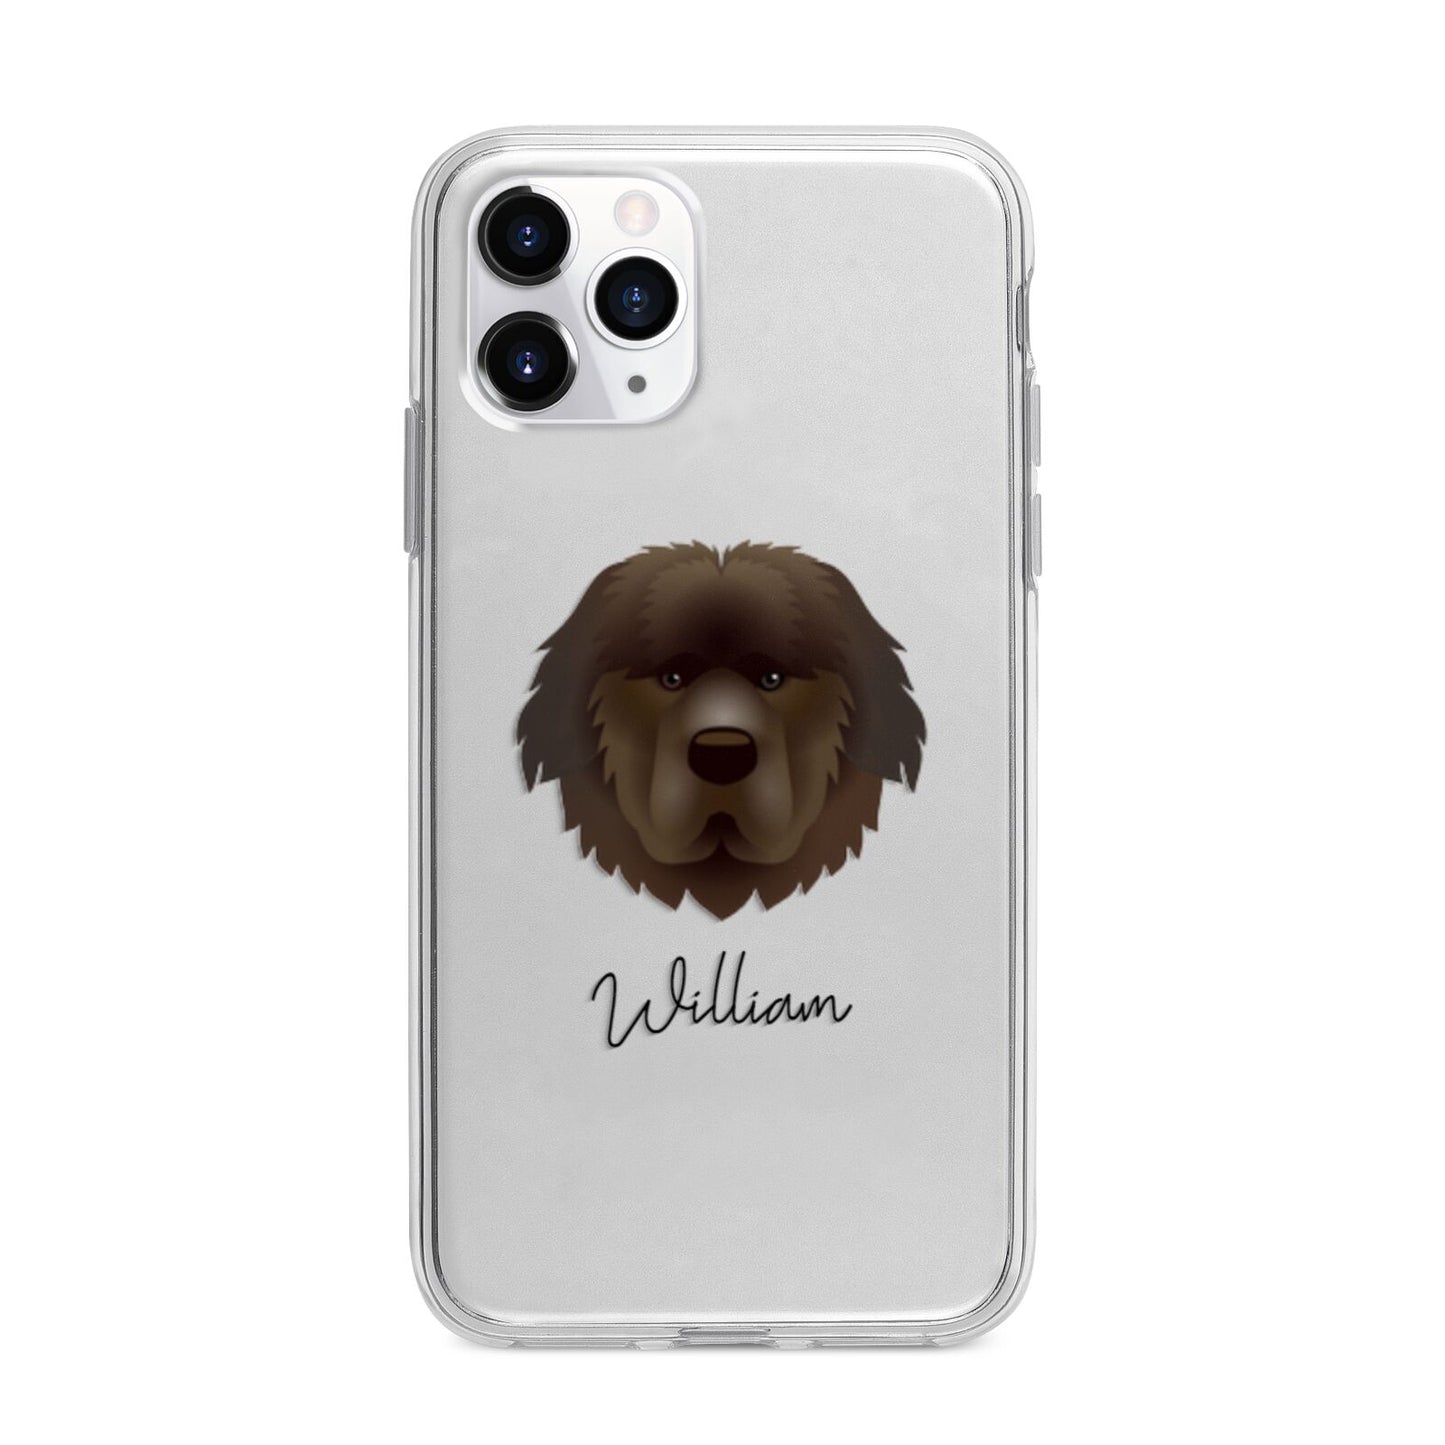 Newfoundland Personalised Apple iPhone 11 Pro Max in Silver with Bumper Case